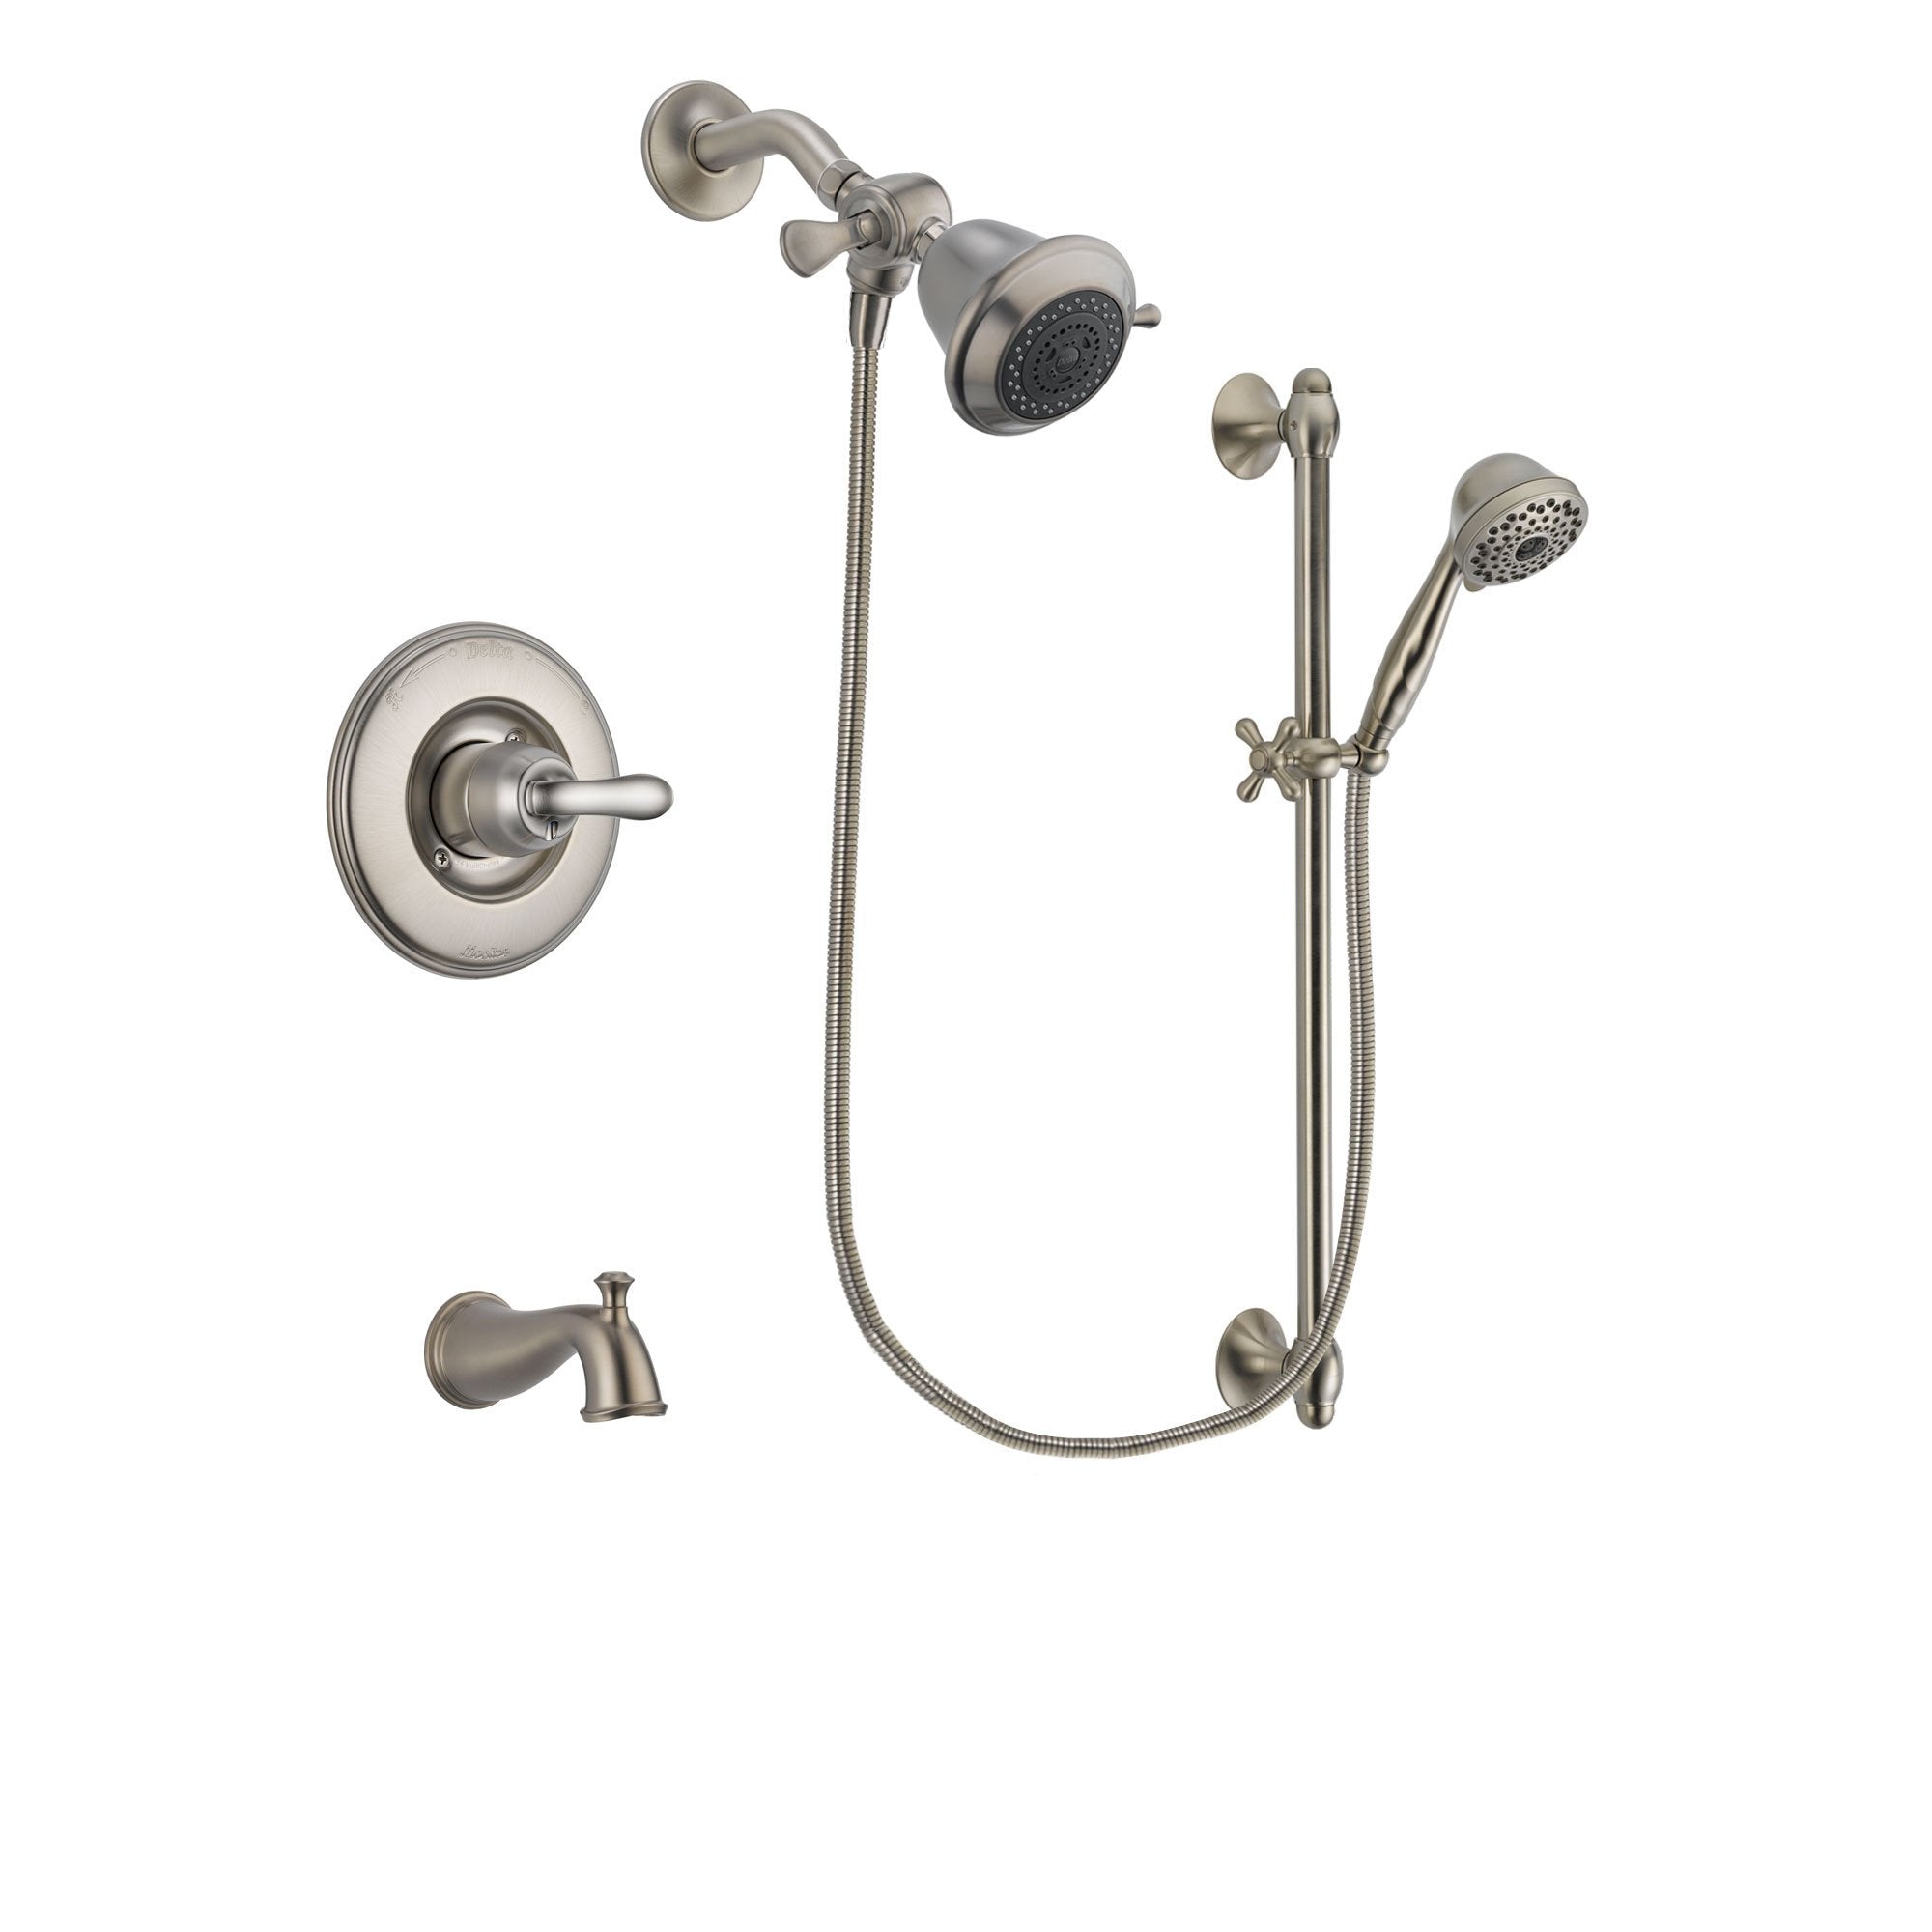 Delta Linden Stainless Steel Finish Tub and Shower Faucet System Package with Shower Head and 7-Spray Handheld Shower with Slide Bar Includes Rough-in Valve and Tub Spout DSP1667V